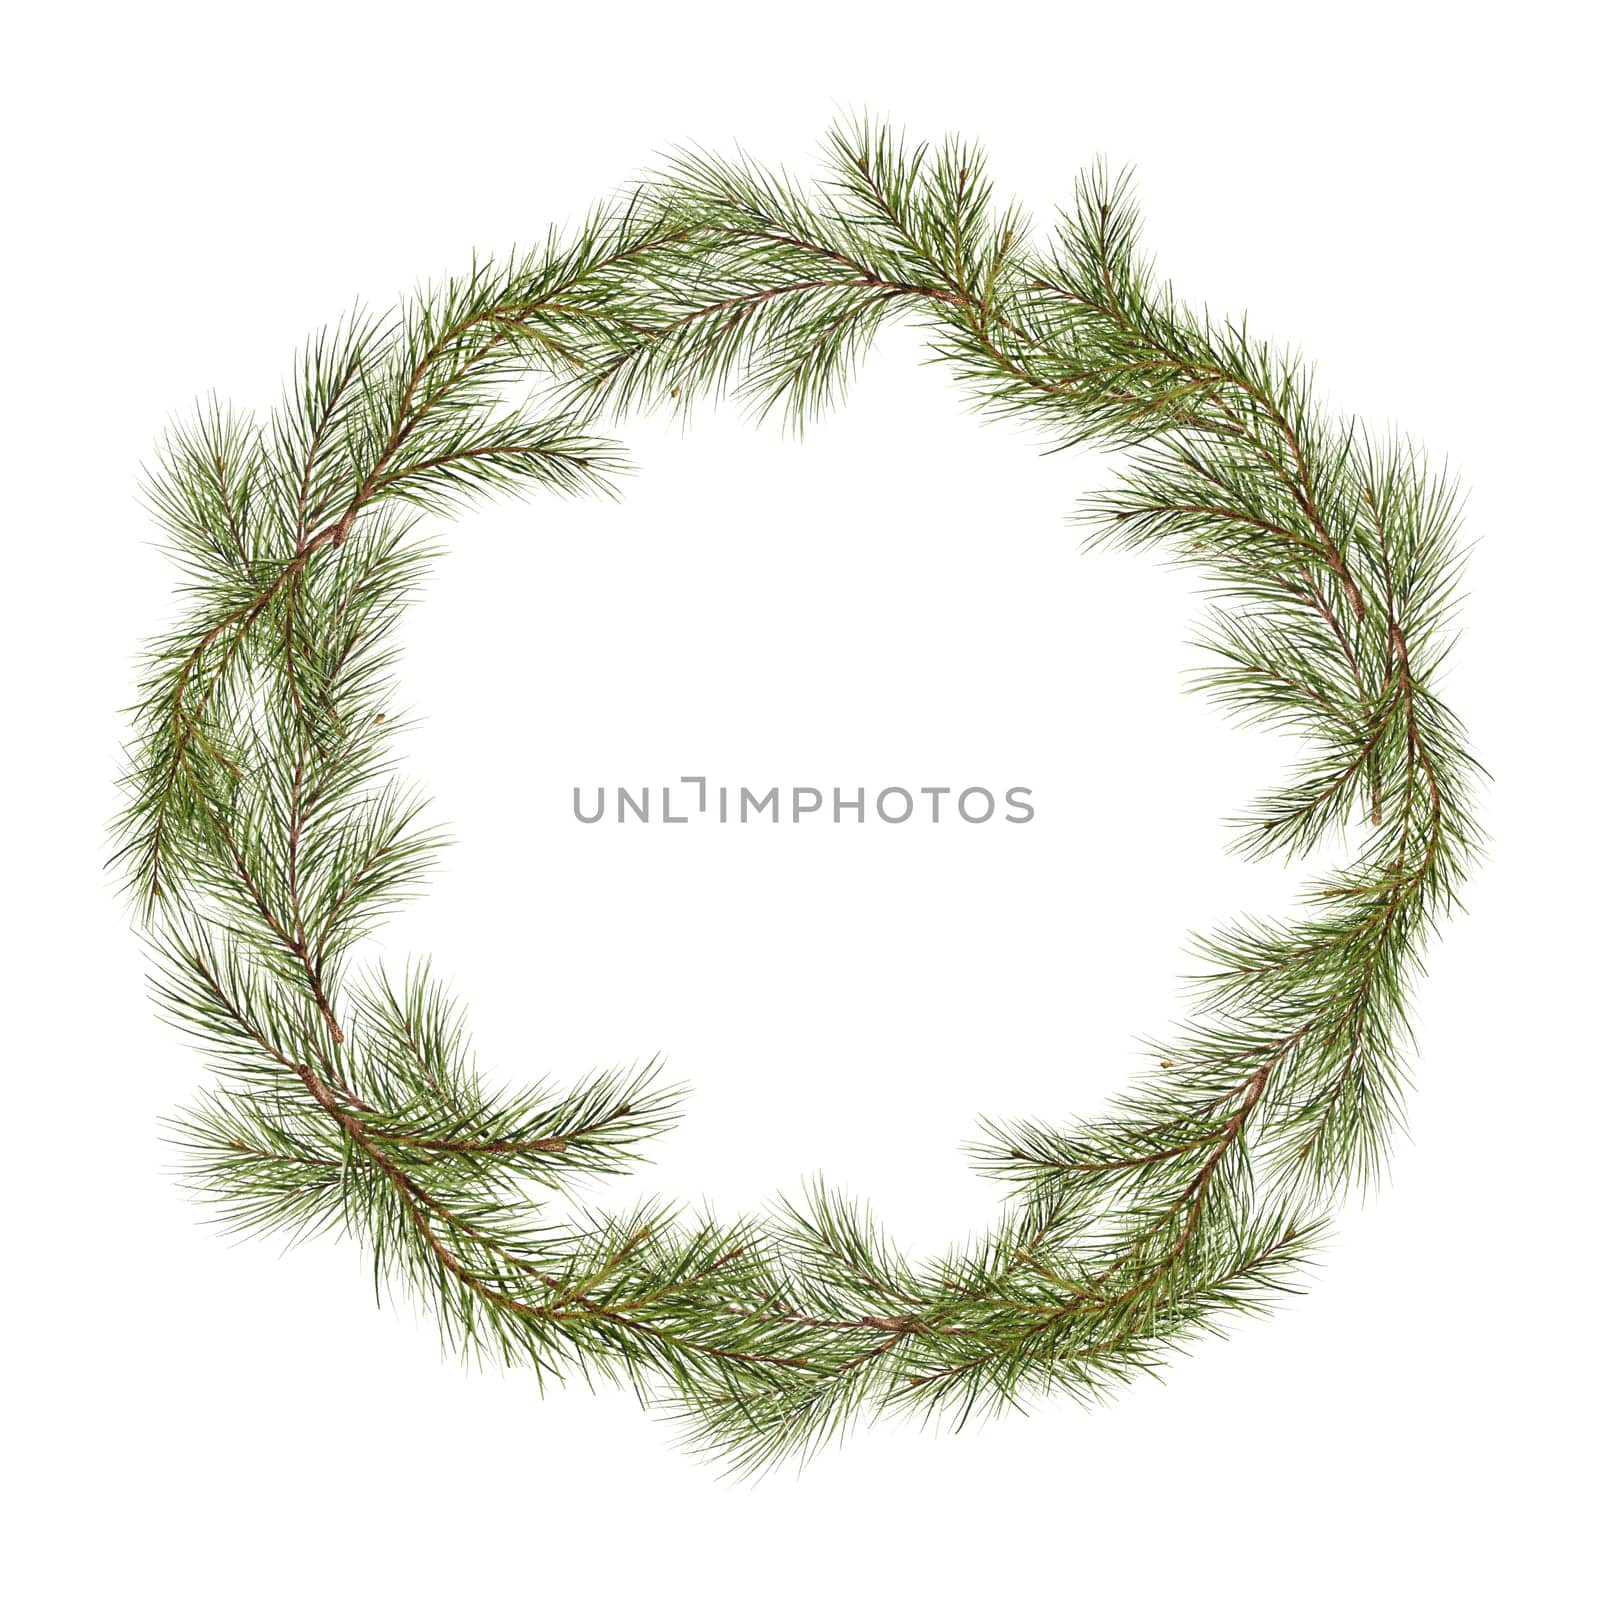 Basic Christmas wreath crafted from pine boughs. Circular frame with space for text. Evergreen for the festive tone. Template for holiday cards, invites, and more. Watercolor digital illustration by Art_Mari_Ka